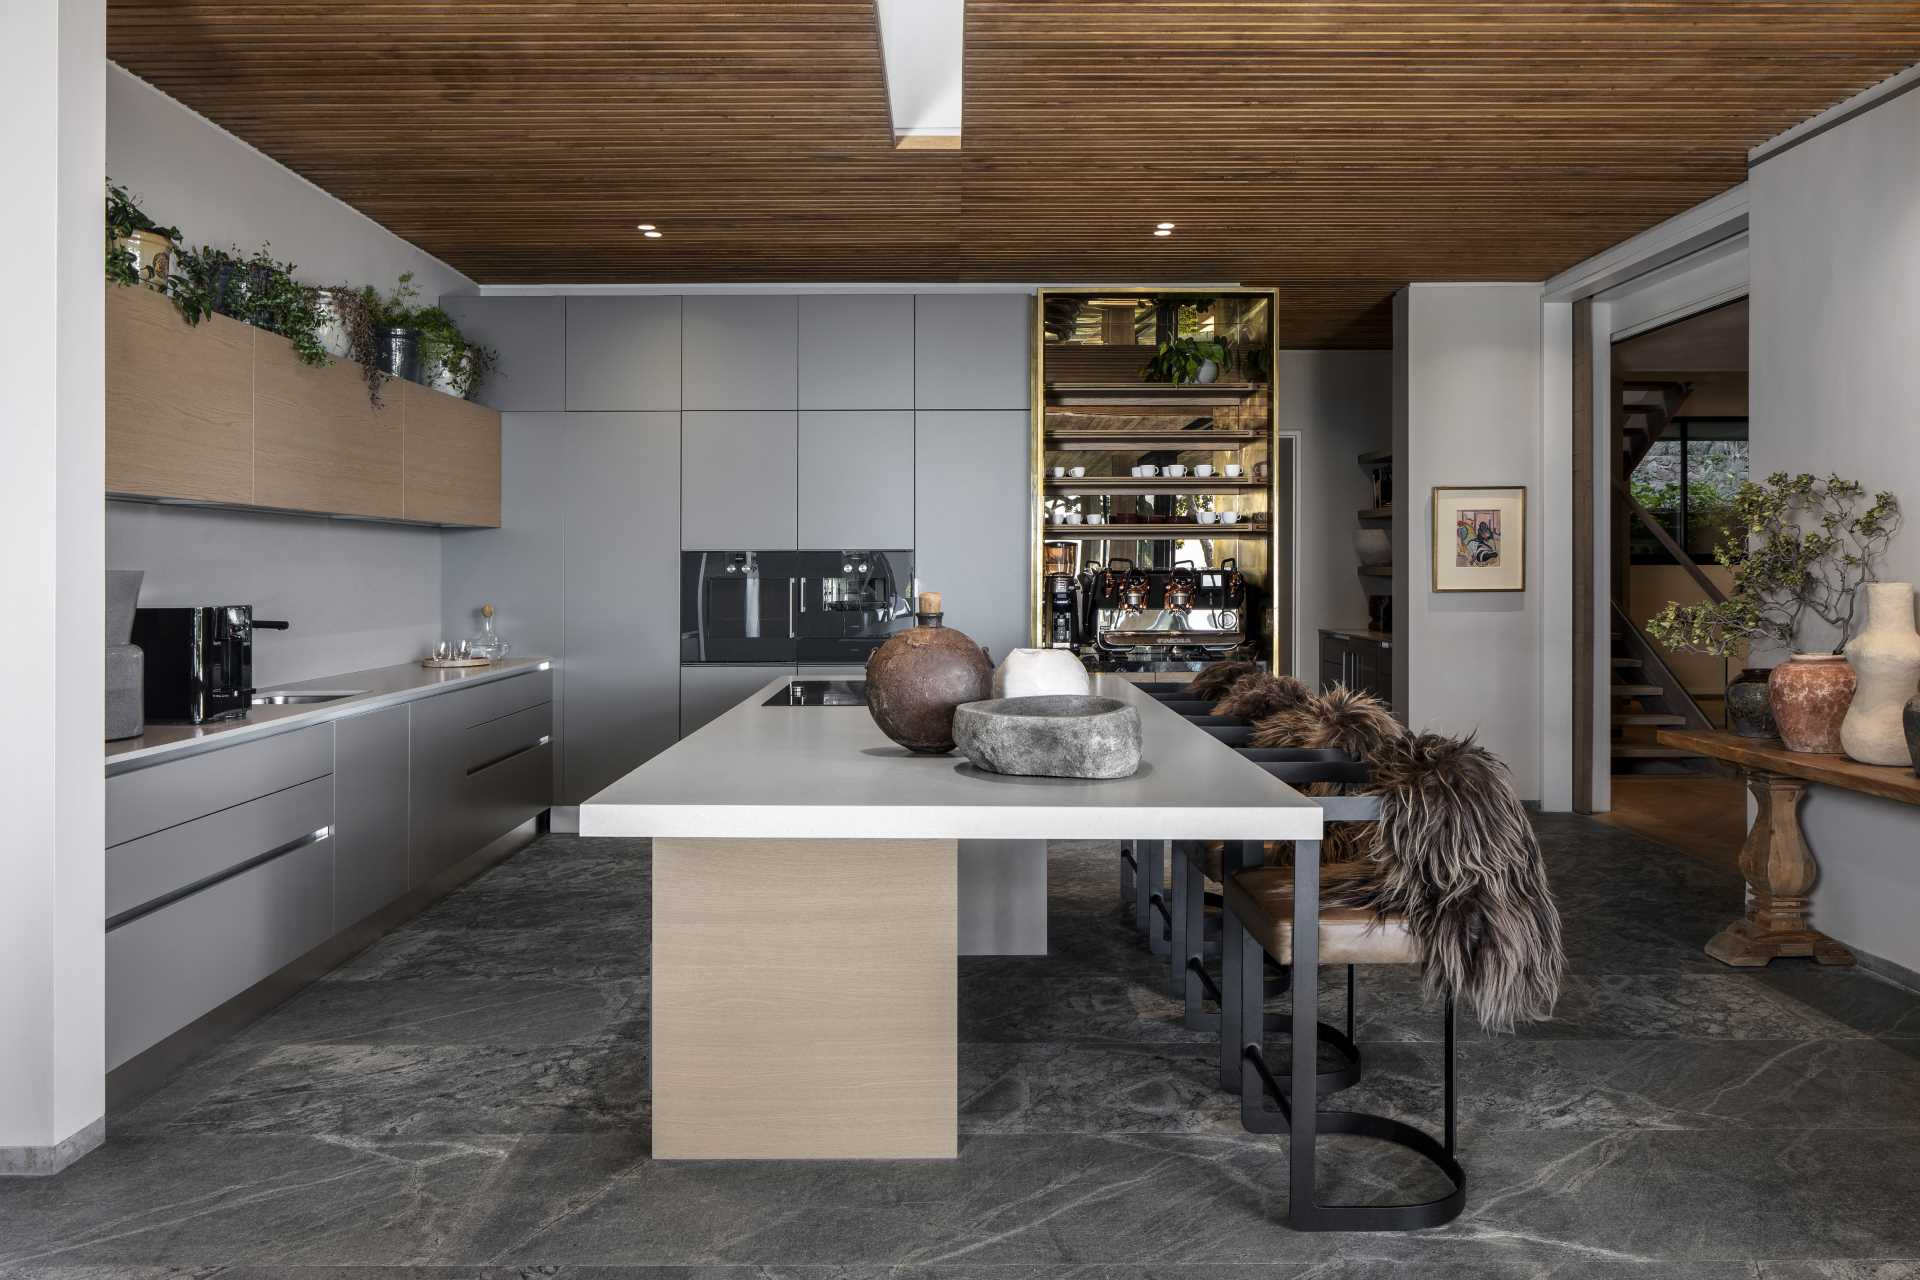 In this modern kitchen, minimalist matte grey cabinets line the walls, while the island adds counter space.